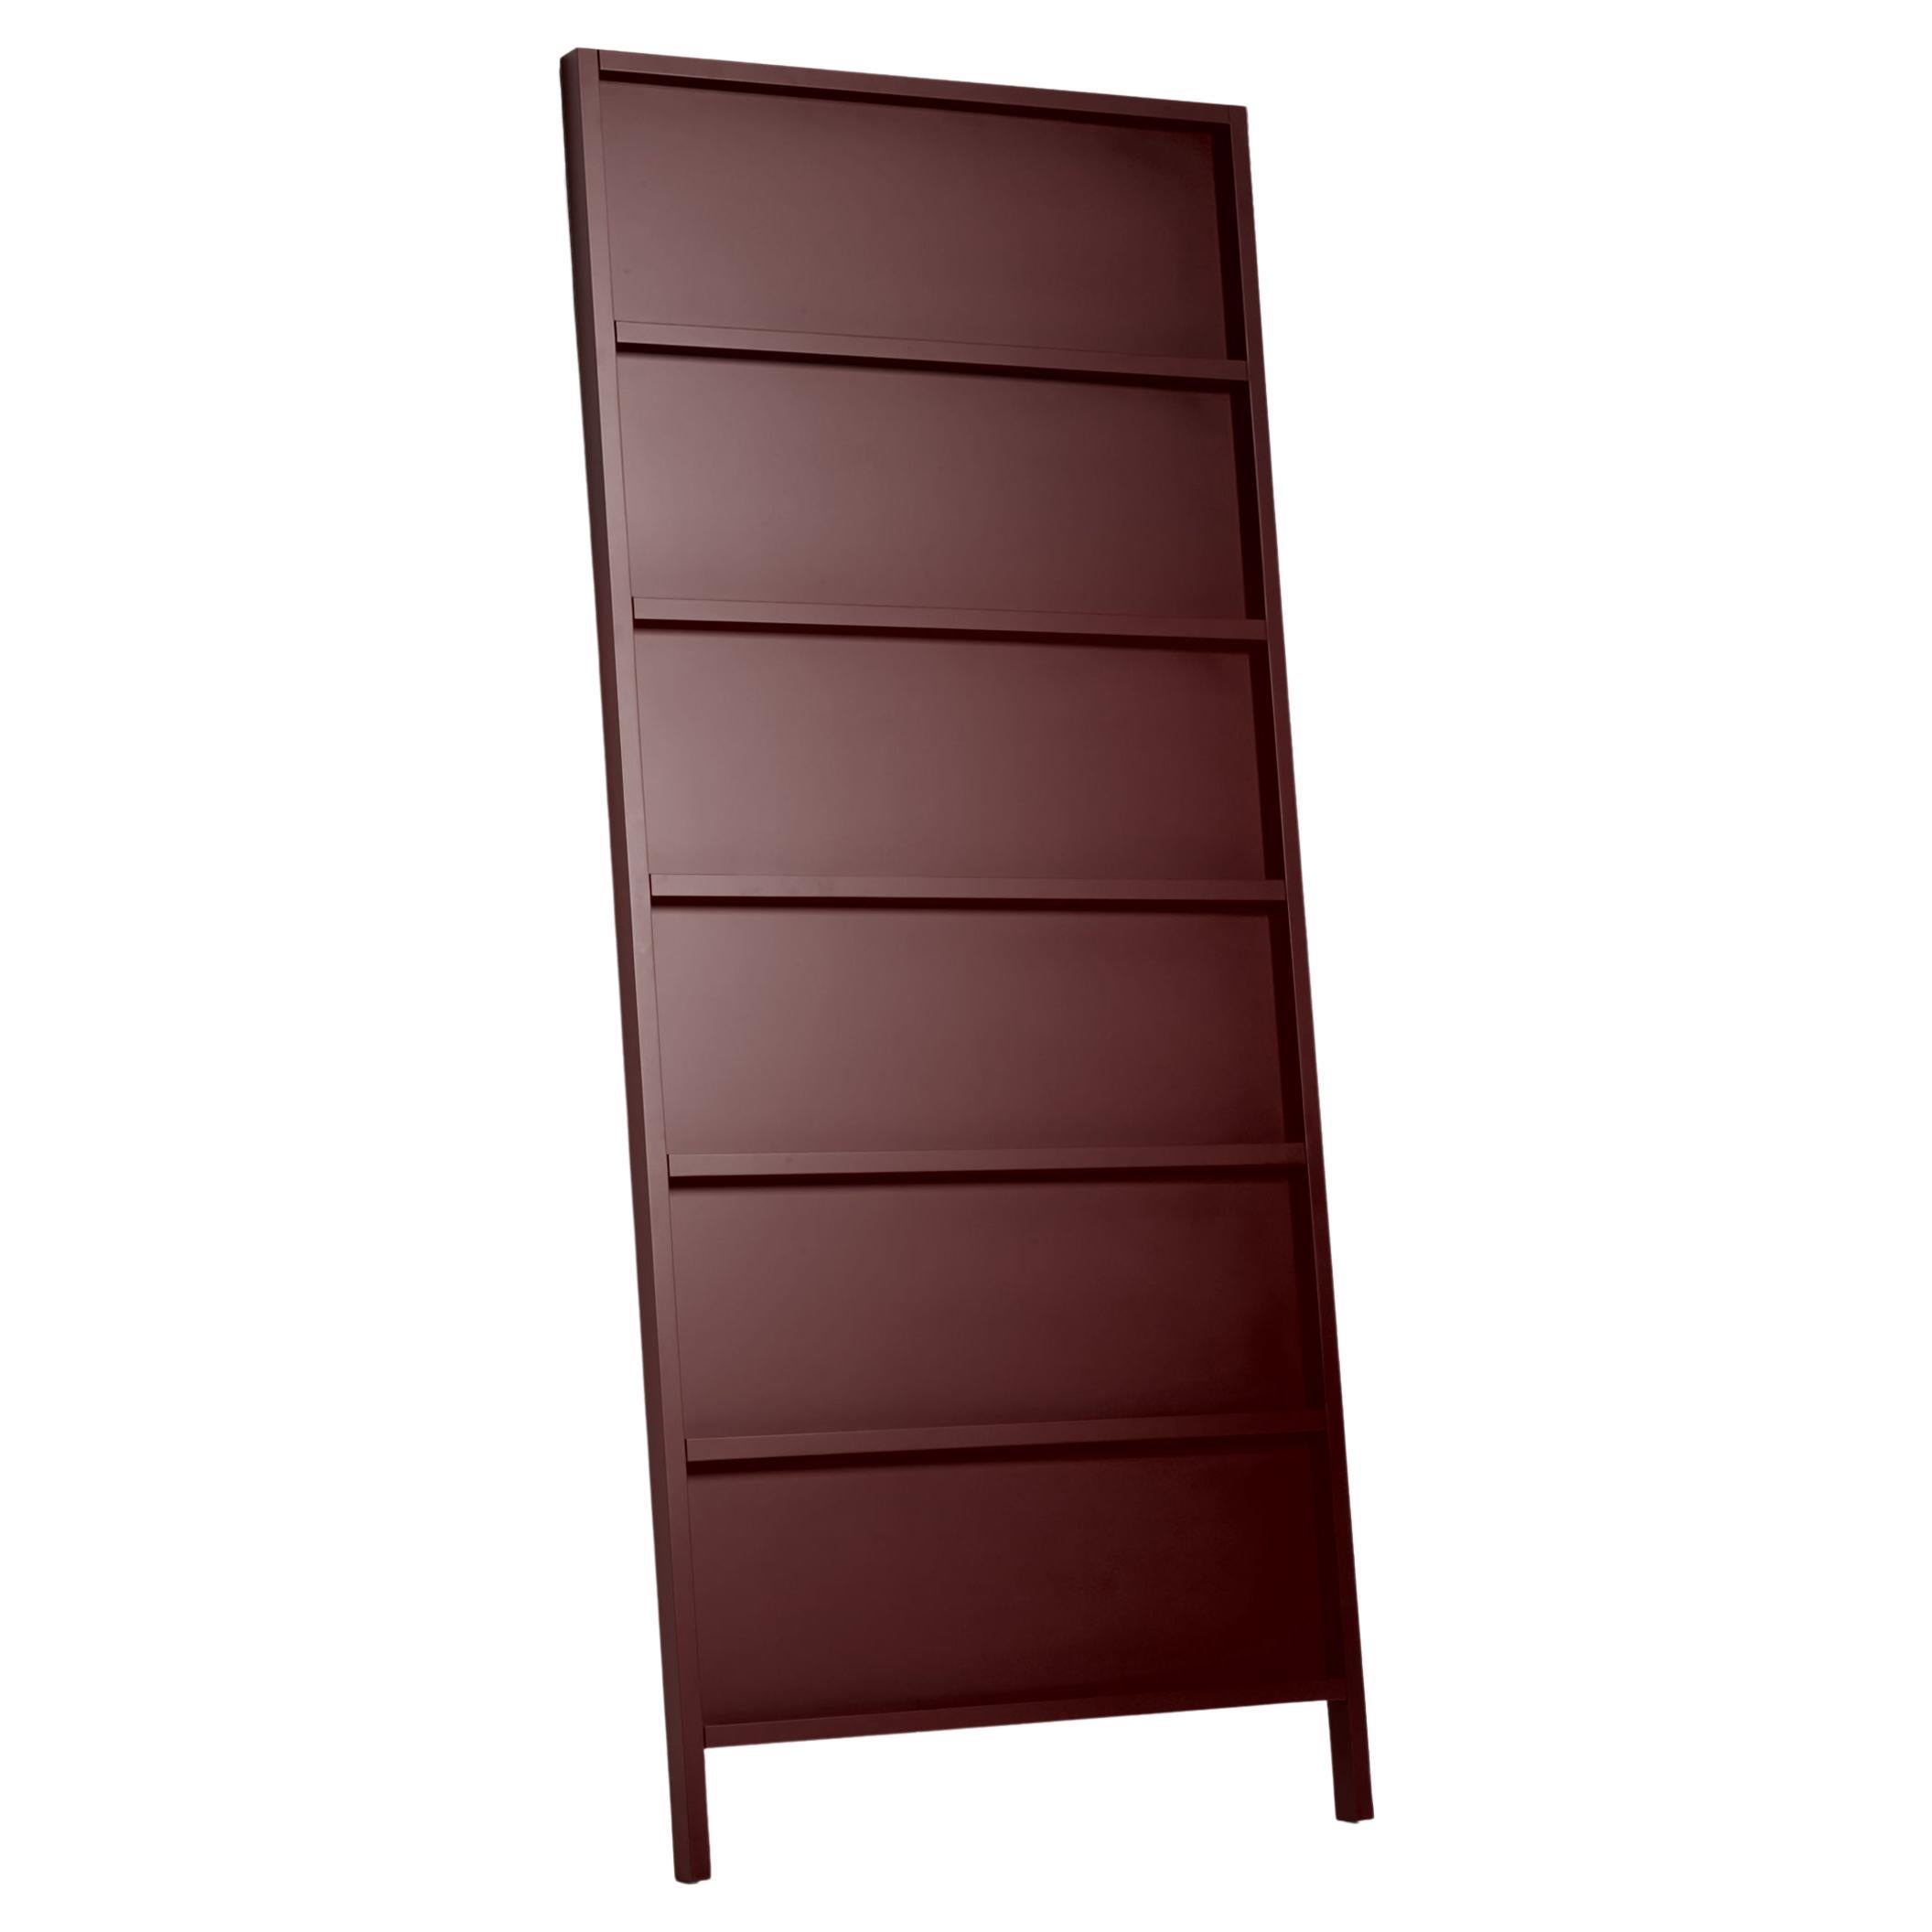 Moooi Oblique Big Cupboard/Wall Shelf in Sepia Brown Lacquered Beech